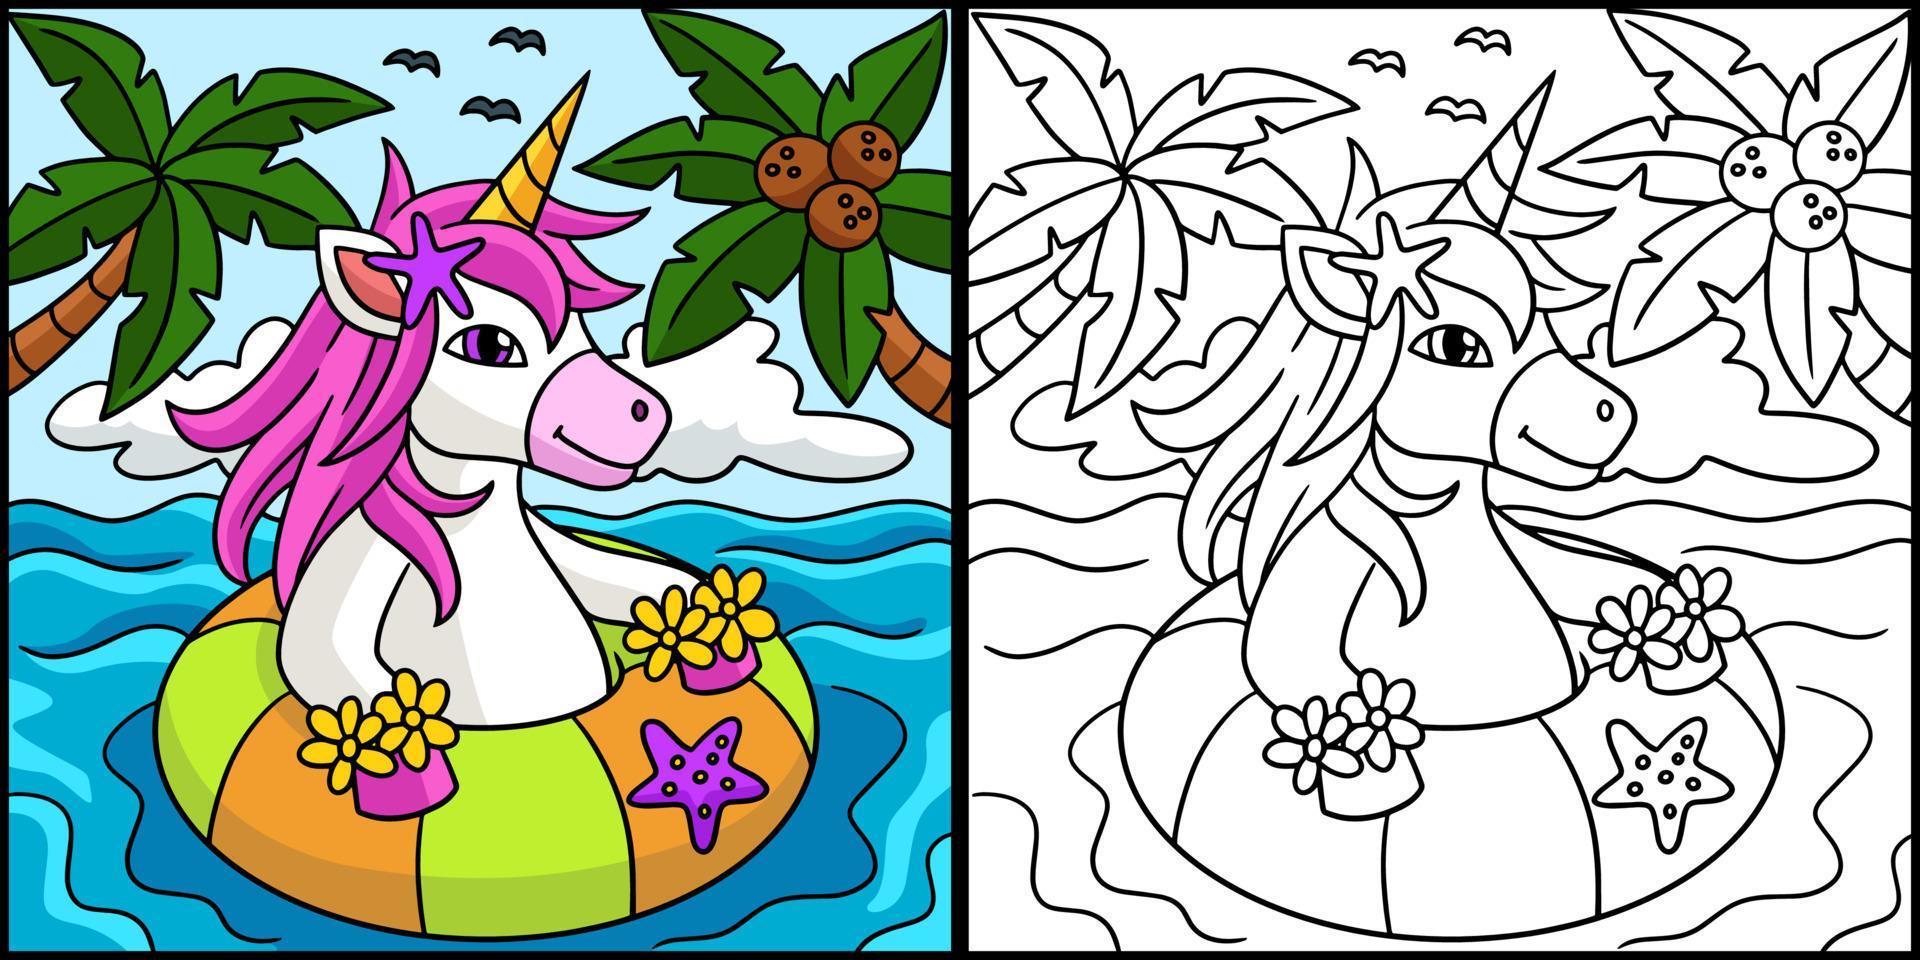 Unicorn In The Ocean Coloring Page Illustration vector